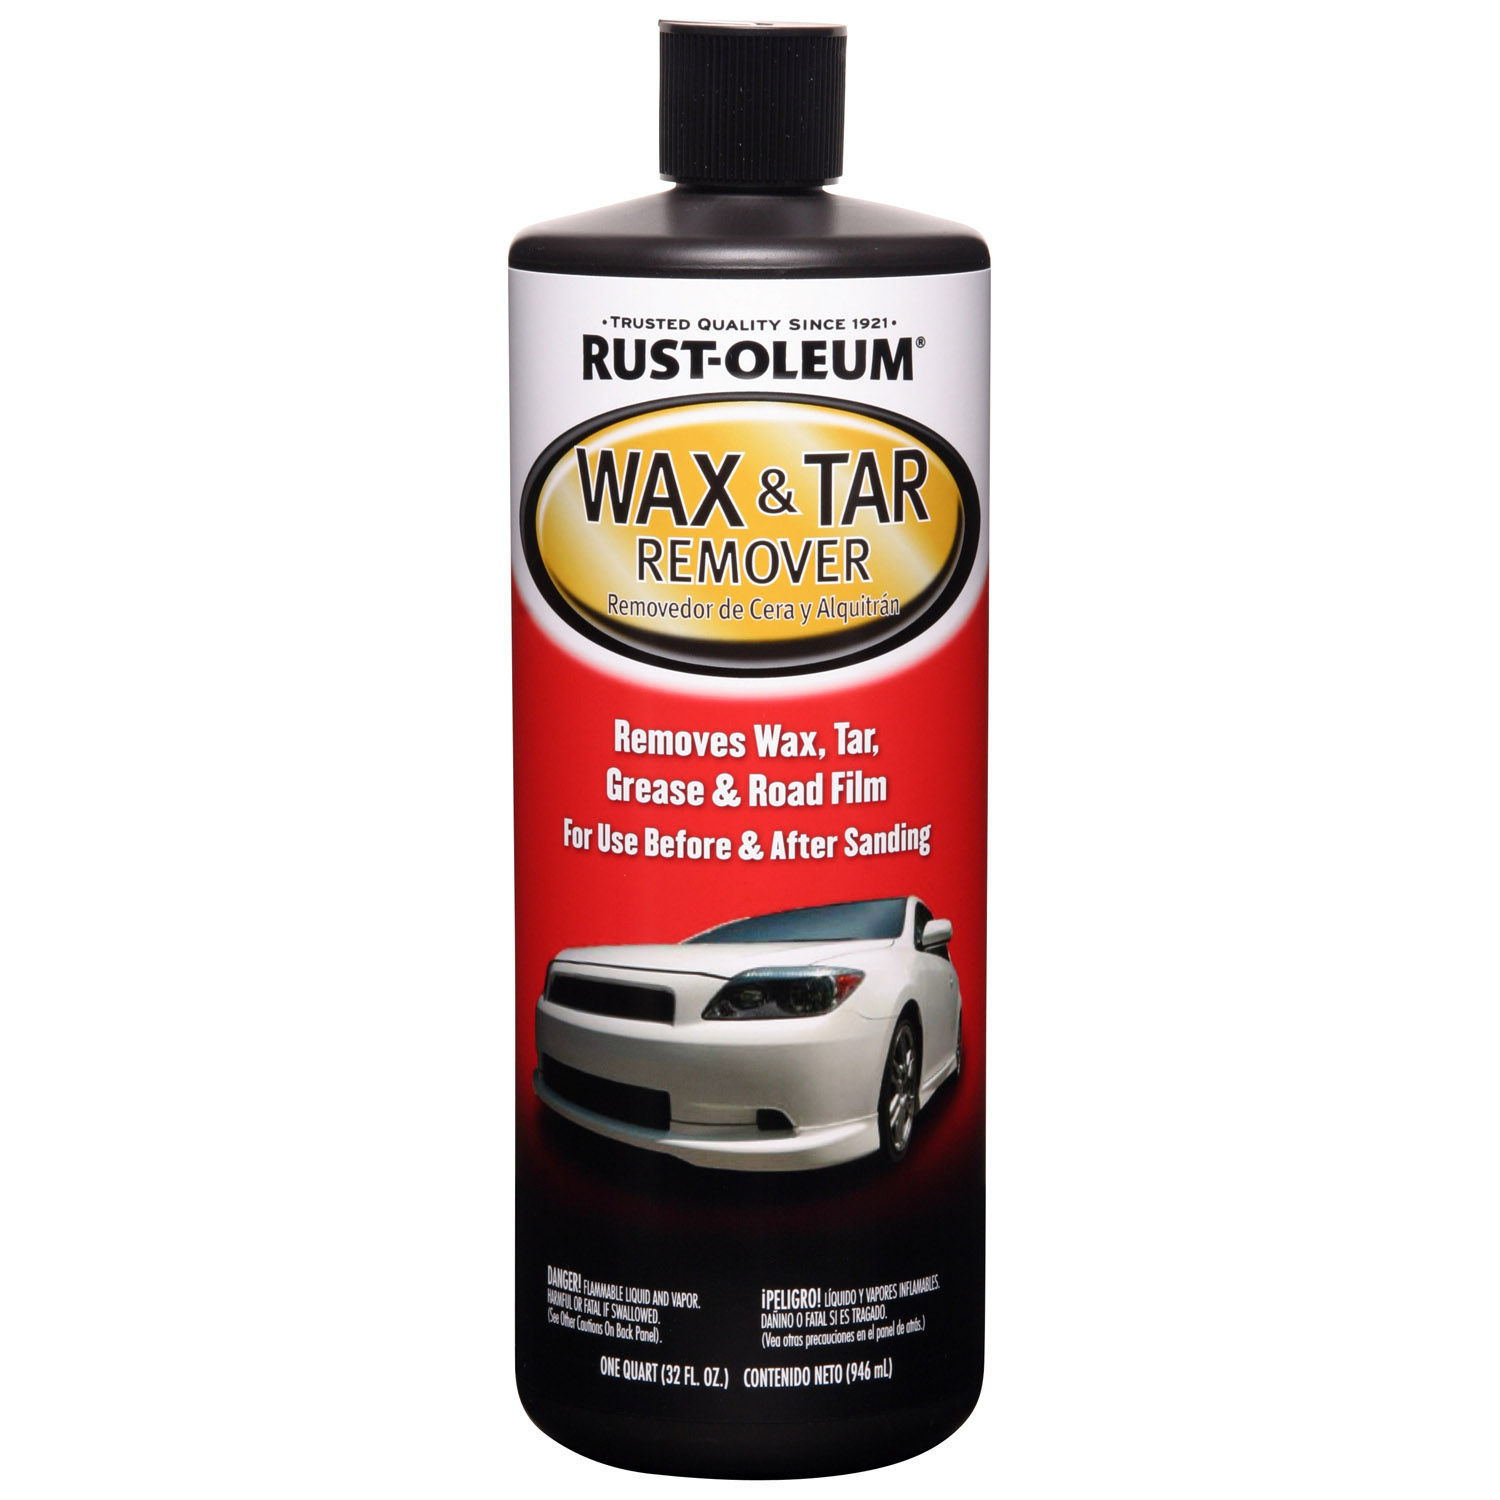 Rust-Oleum Automotive Wax and Tar Remover - image 1 of 5